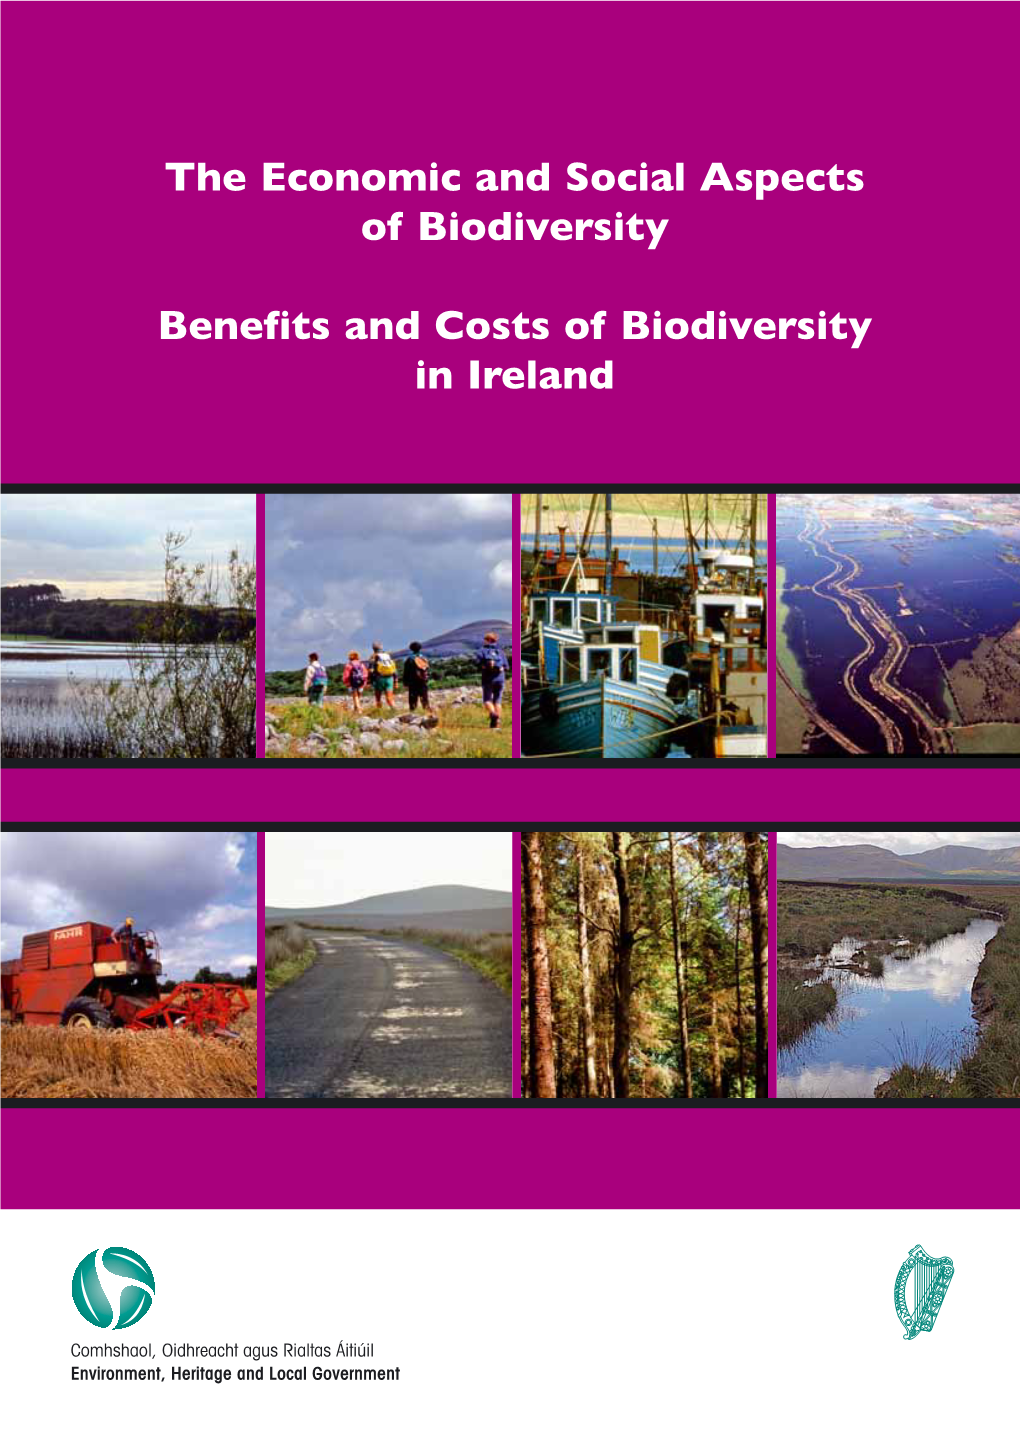 The Economic and Social Aspects of Biodiversity Benefits and Costs of Biodiversity in Ireland